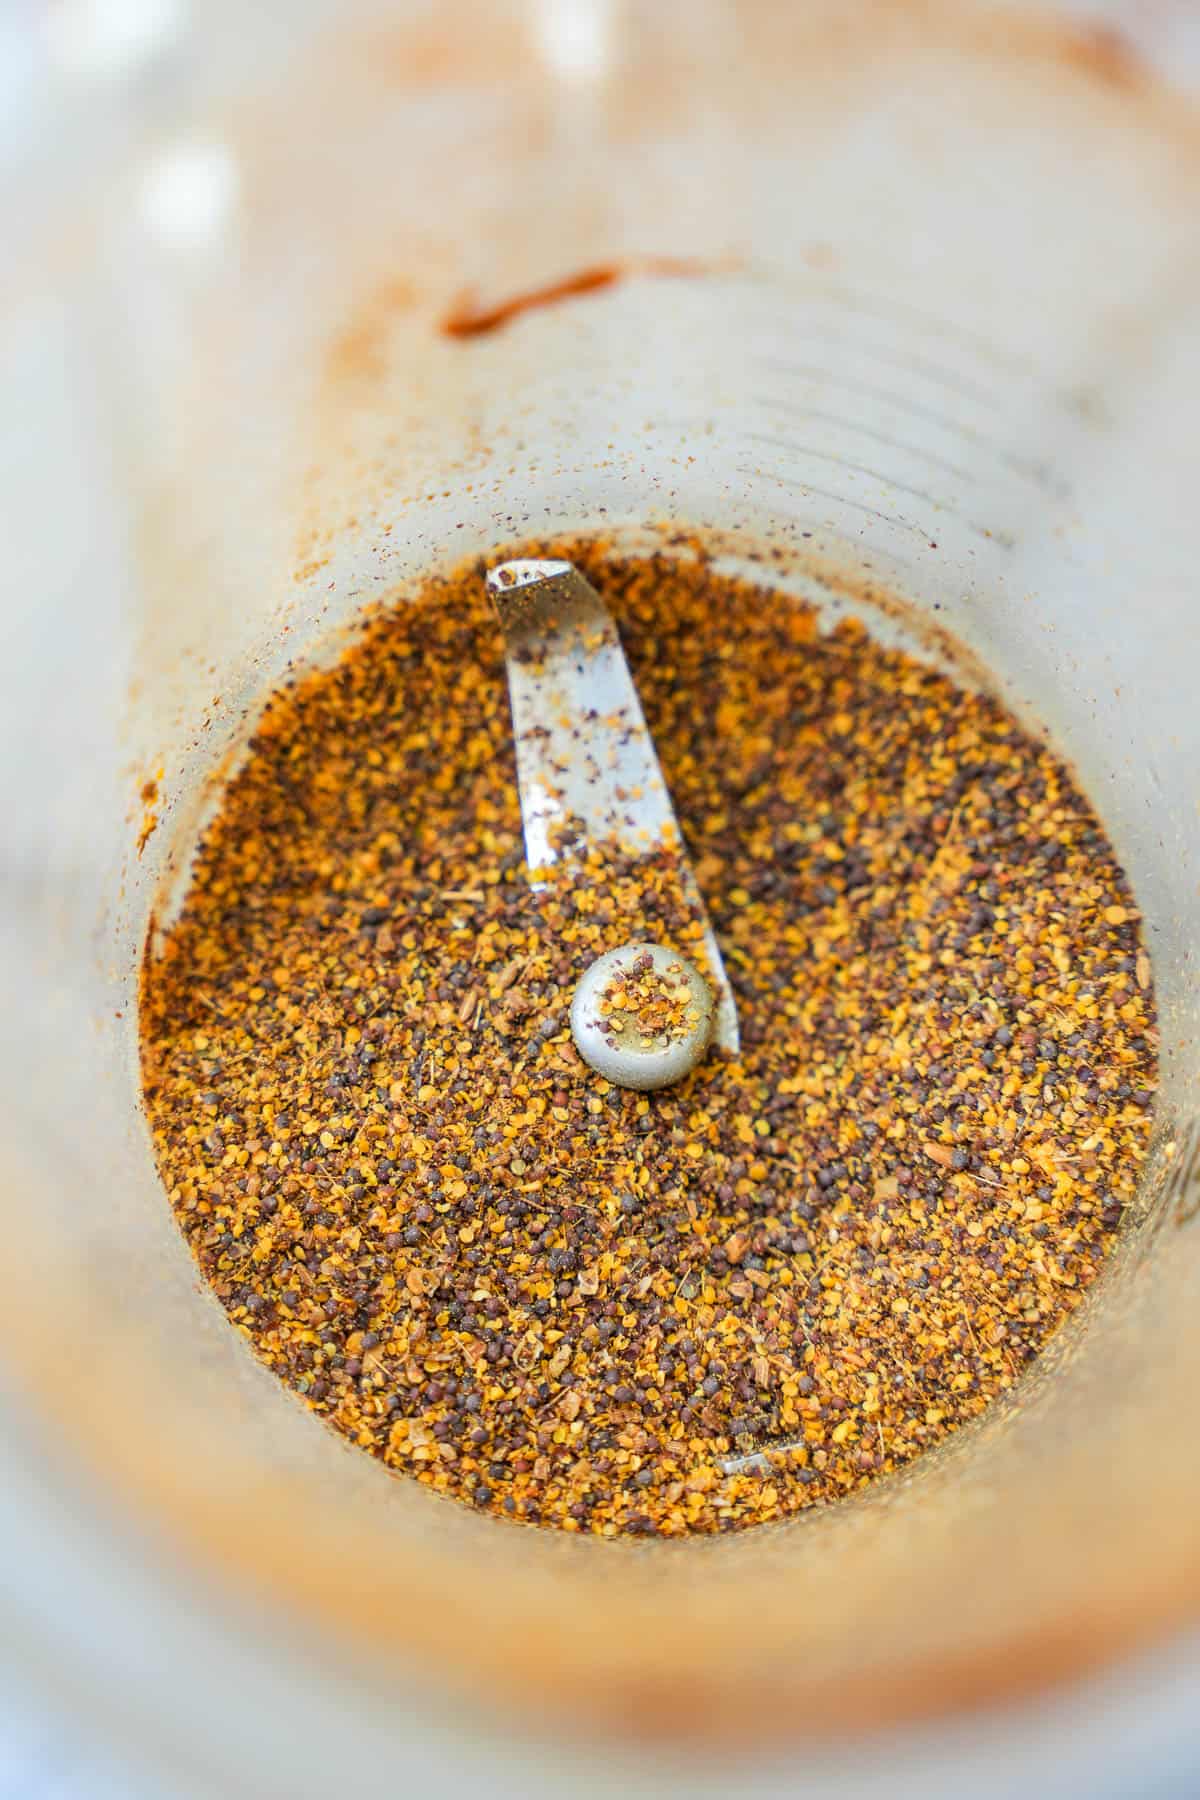 Spices are ground in a blender pitcher.